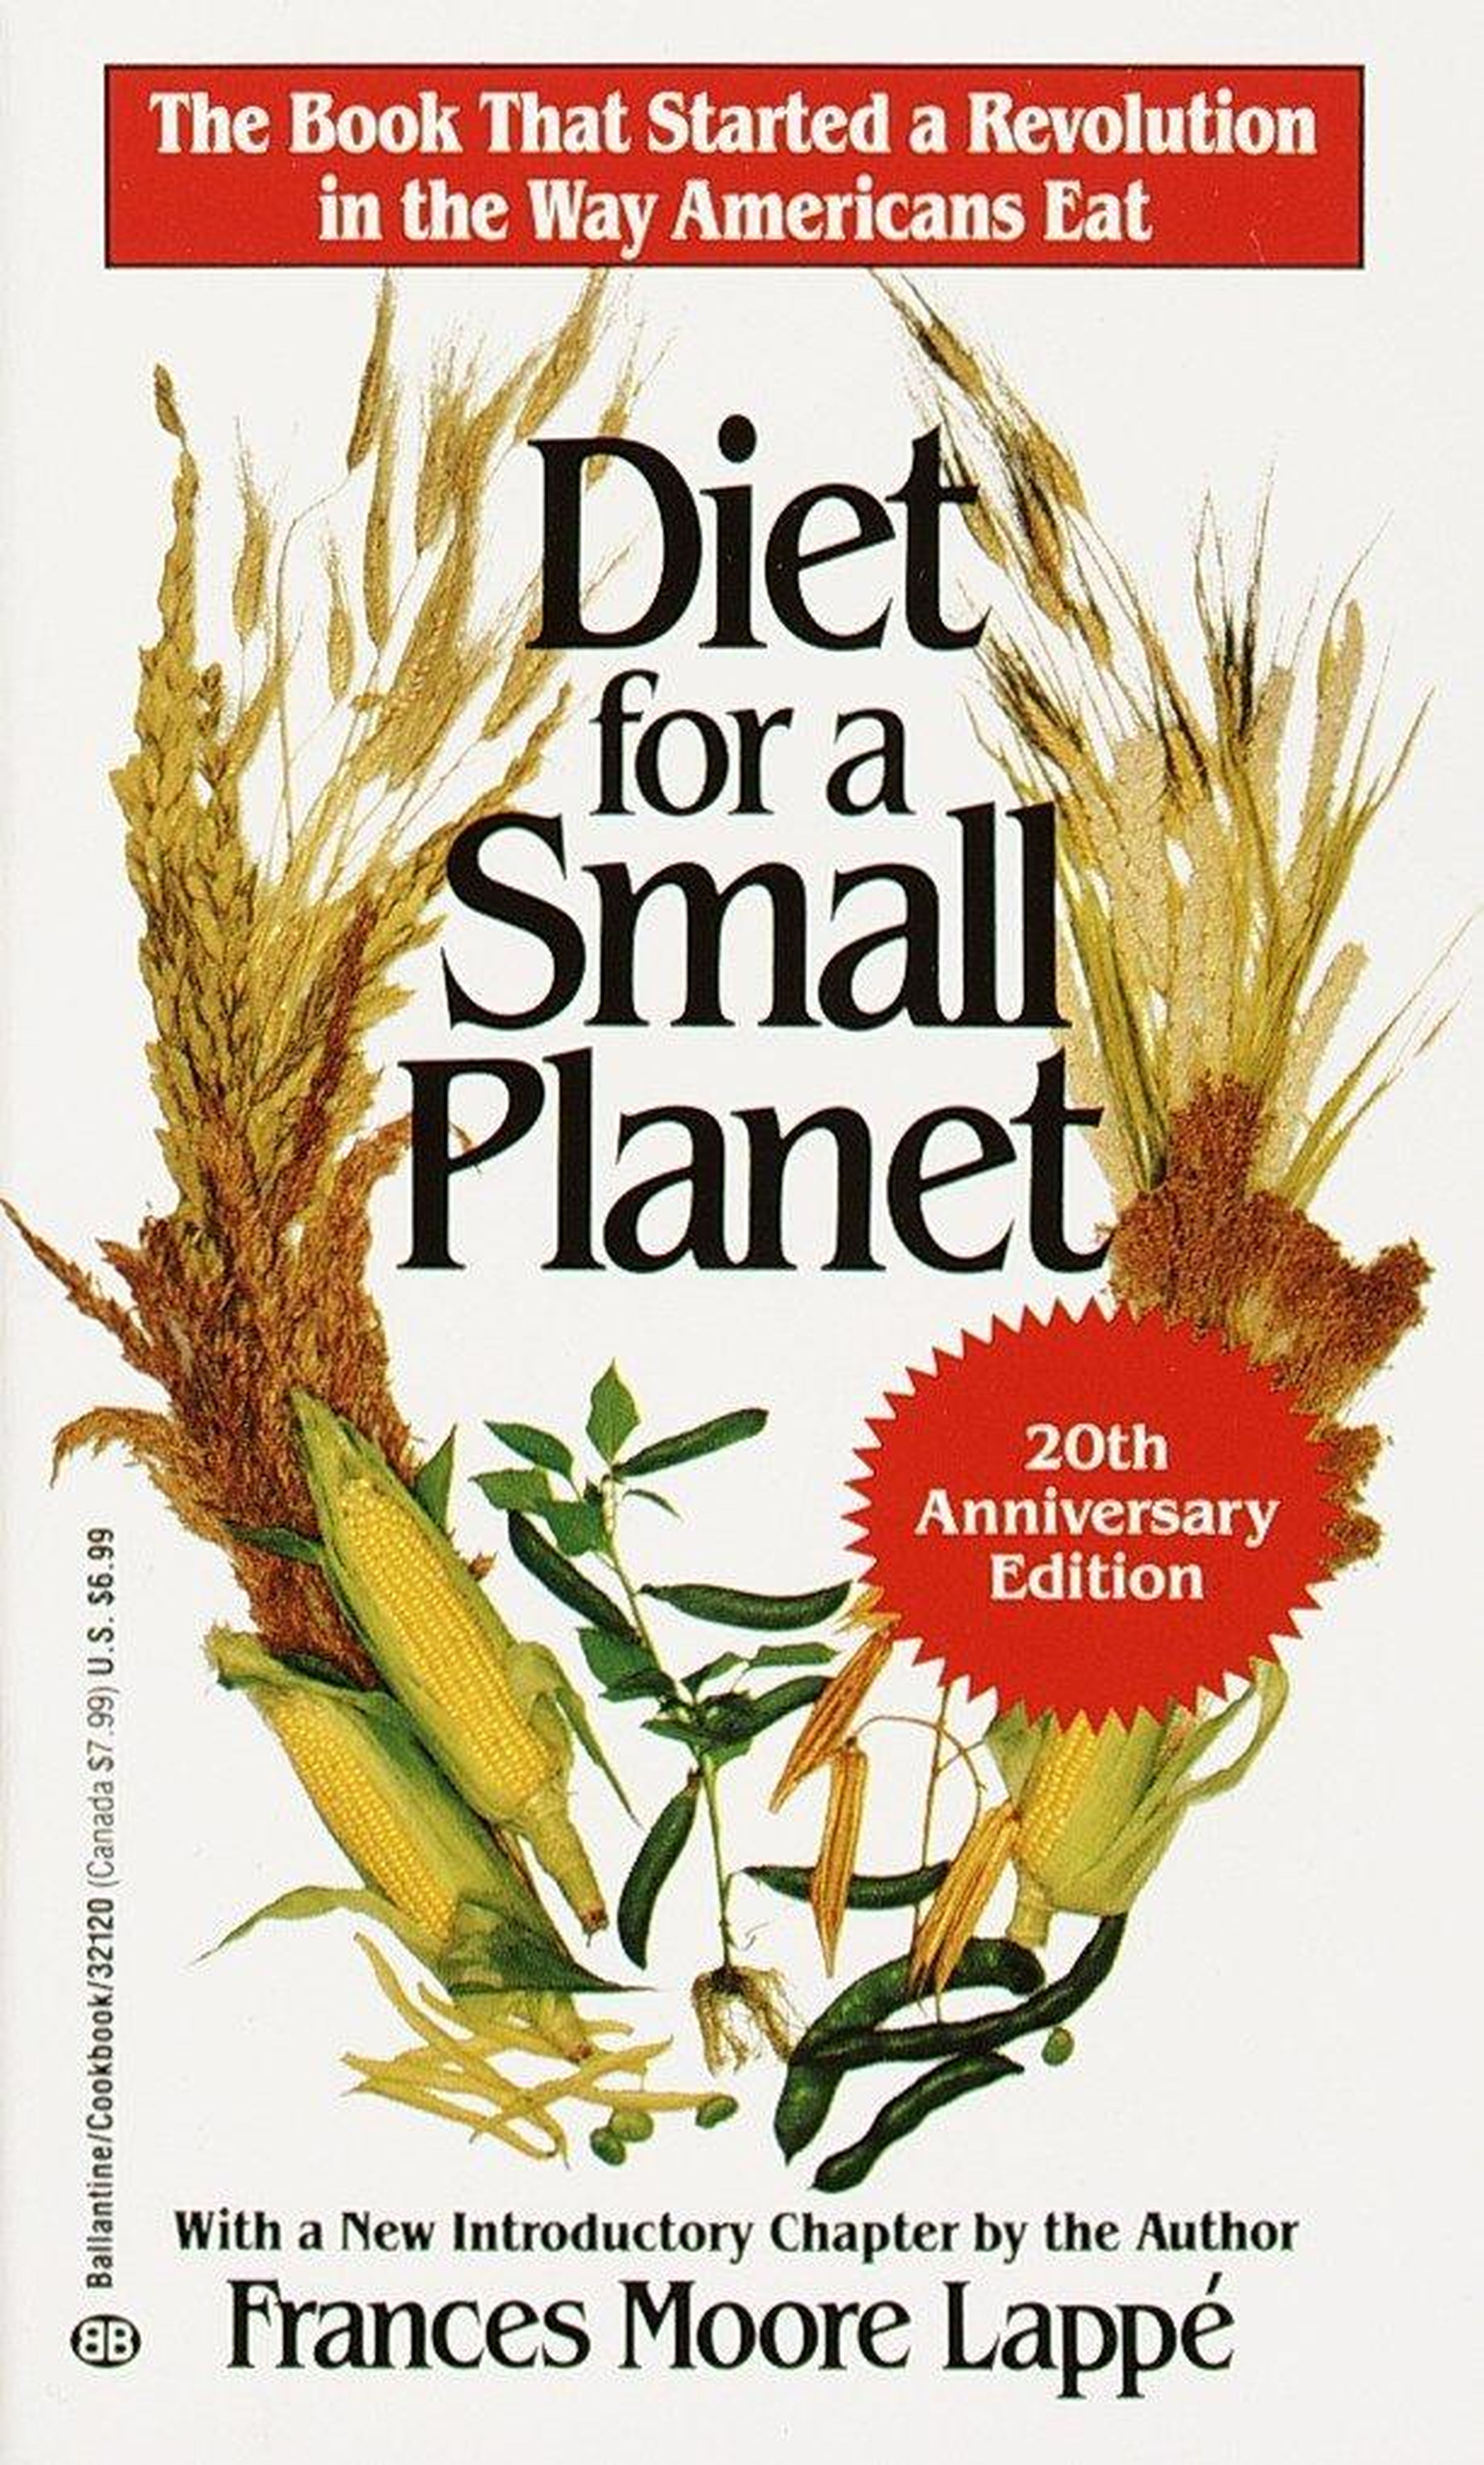 When he was a freshman at Reed College, Jobs discovered a book called “Diet for a Small Planet” by Frances Moore Lappé. “That’s when I swore off meat pretty much for good,” Jobs told his biographer Walter Isaacson.